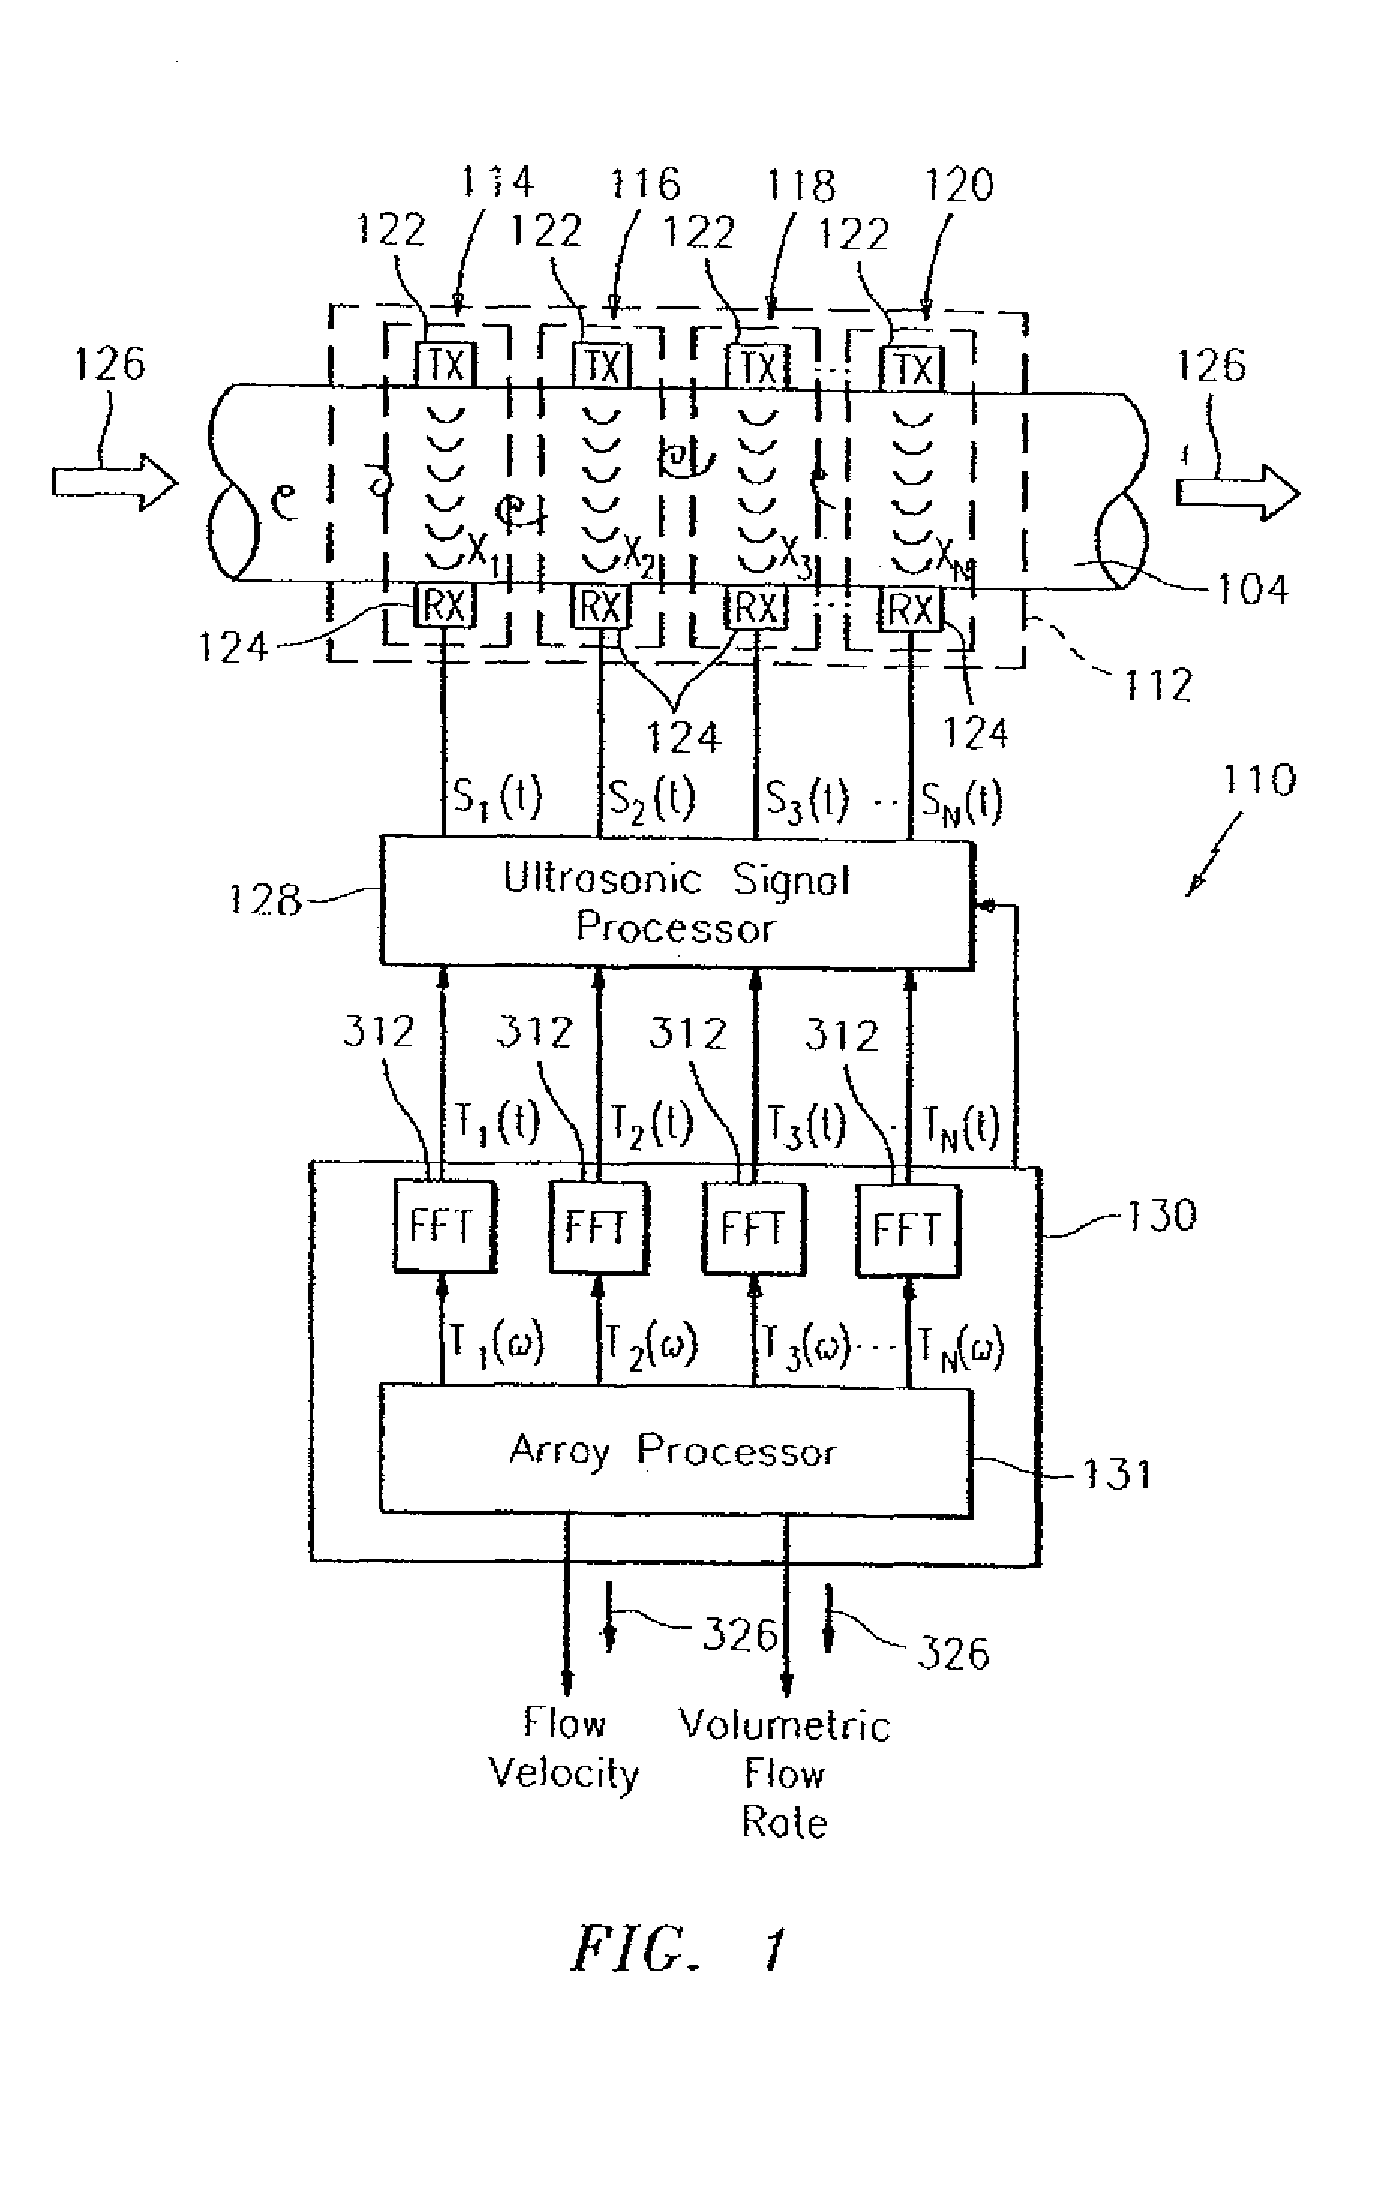 Apparatus and method for attenuating acoustic waves in pipe walls for clamp-on ultrasonic flow meter